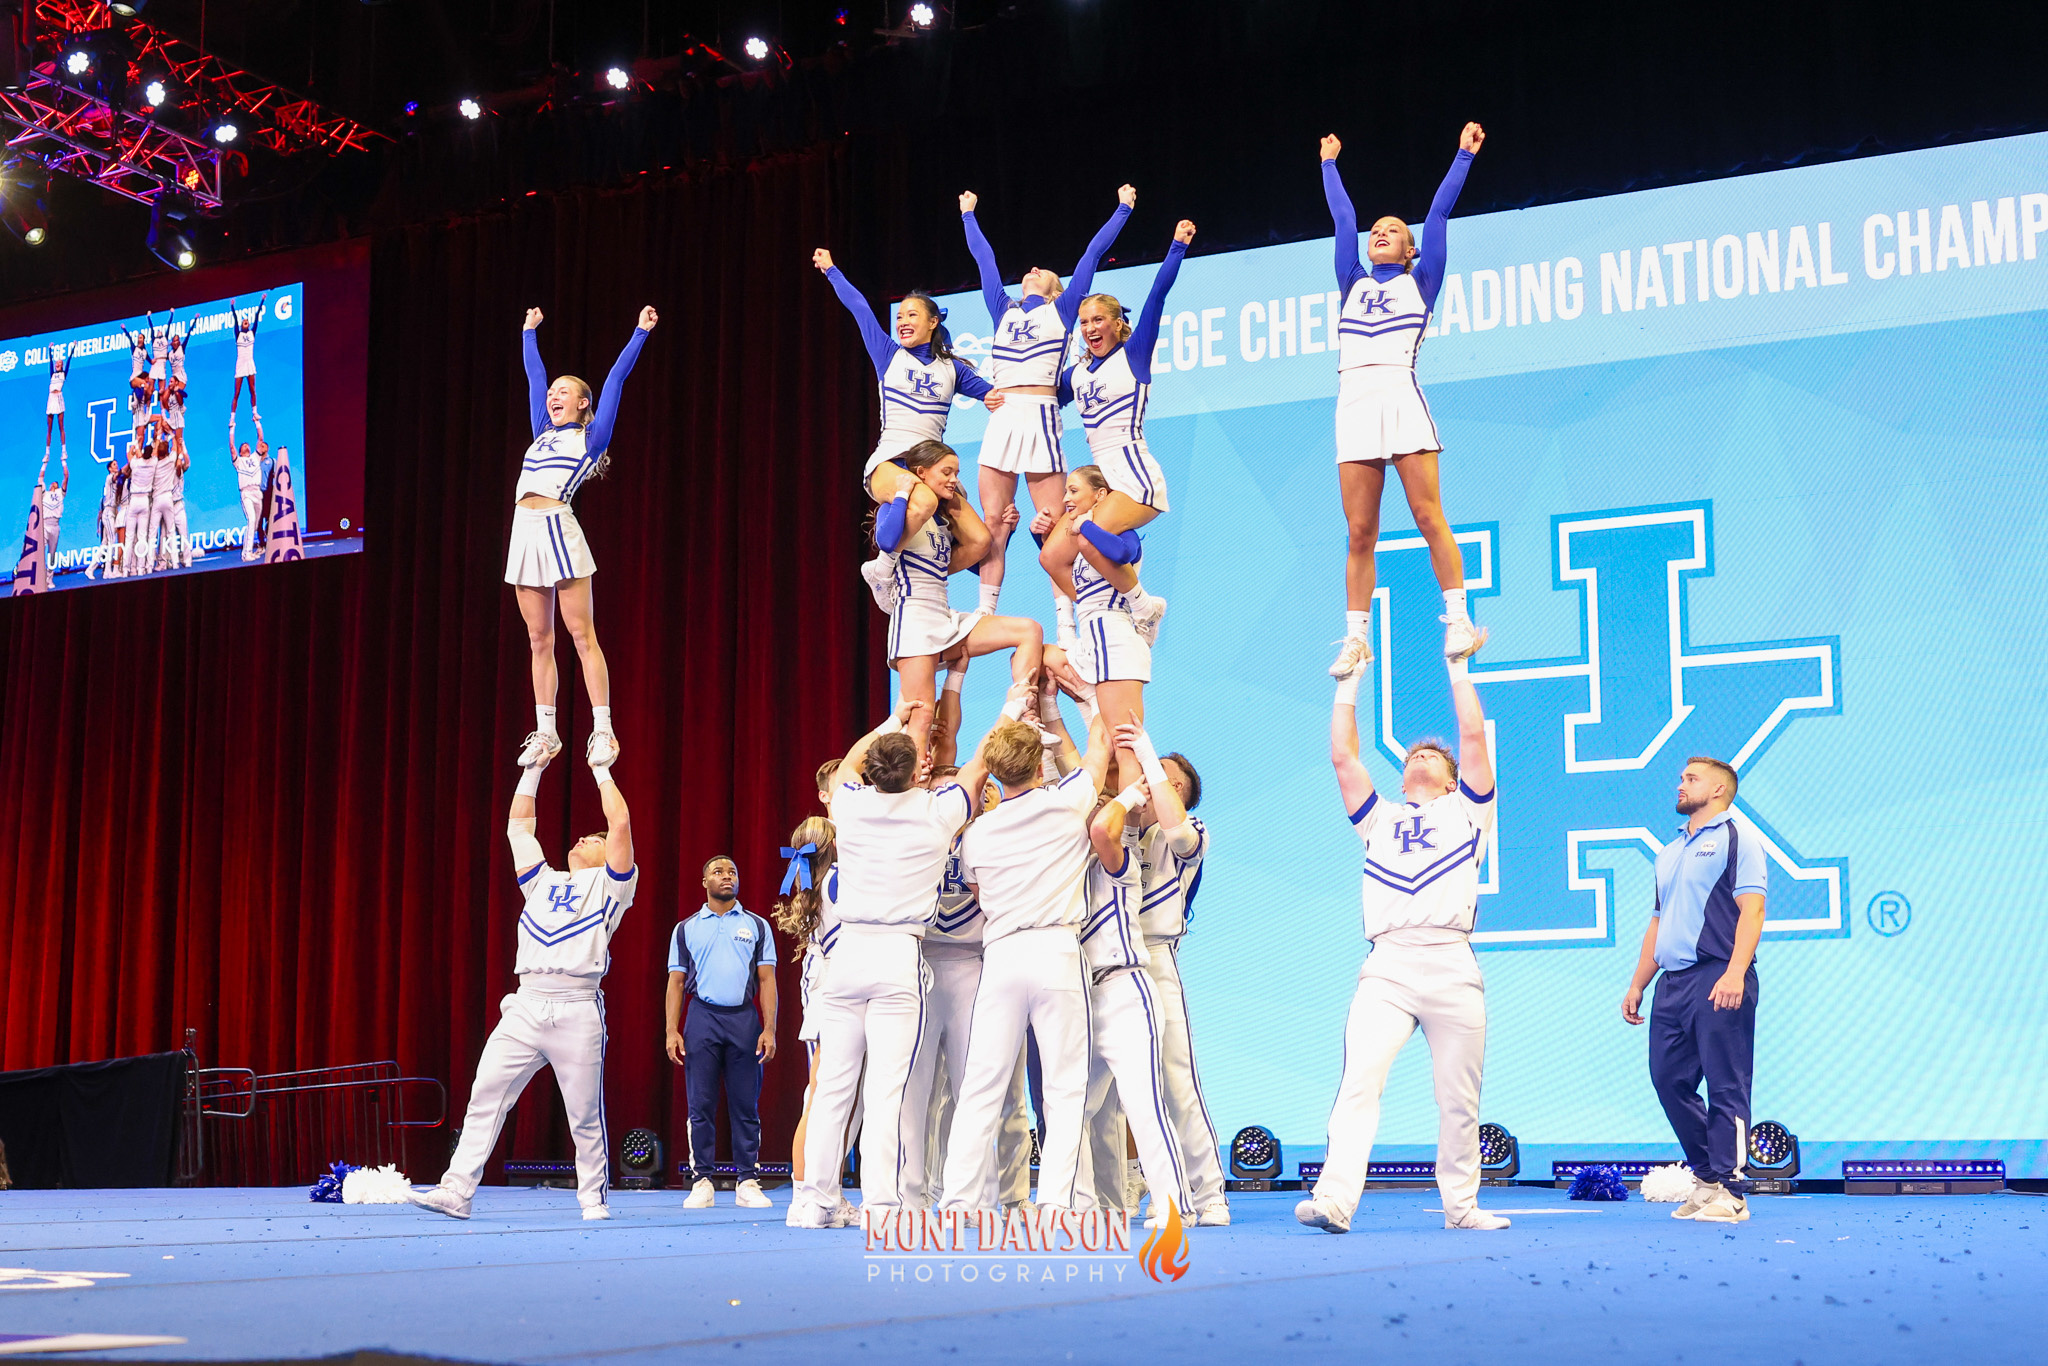 Kentucky Cheer Division 1A Coed Finals Photo Gallery